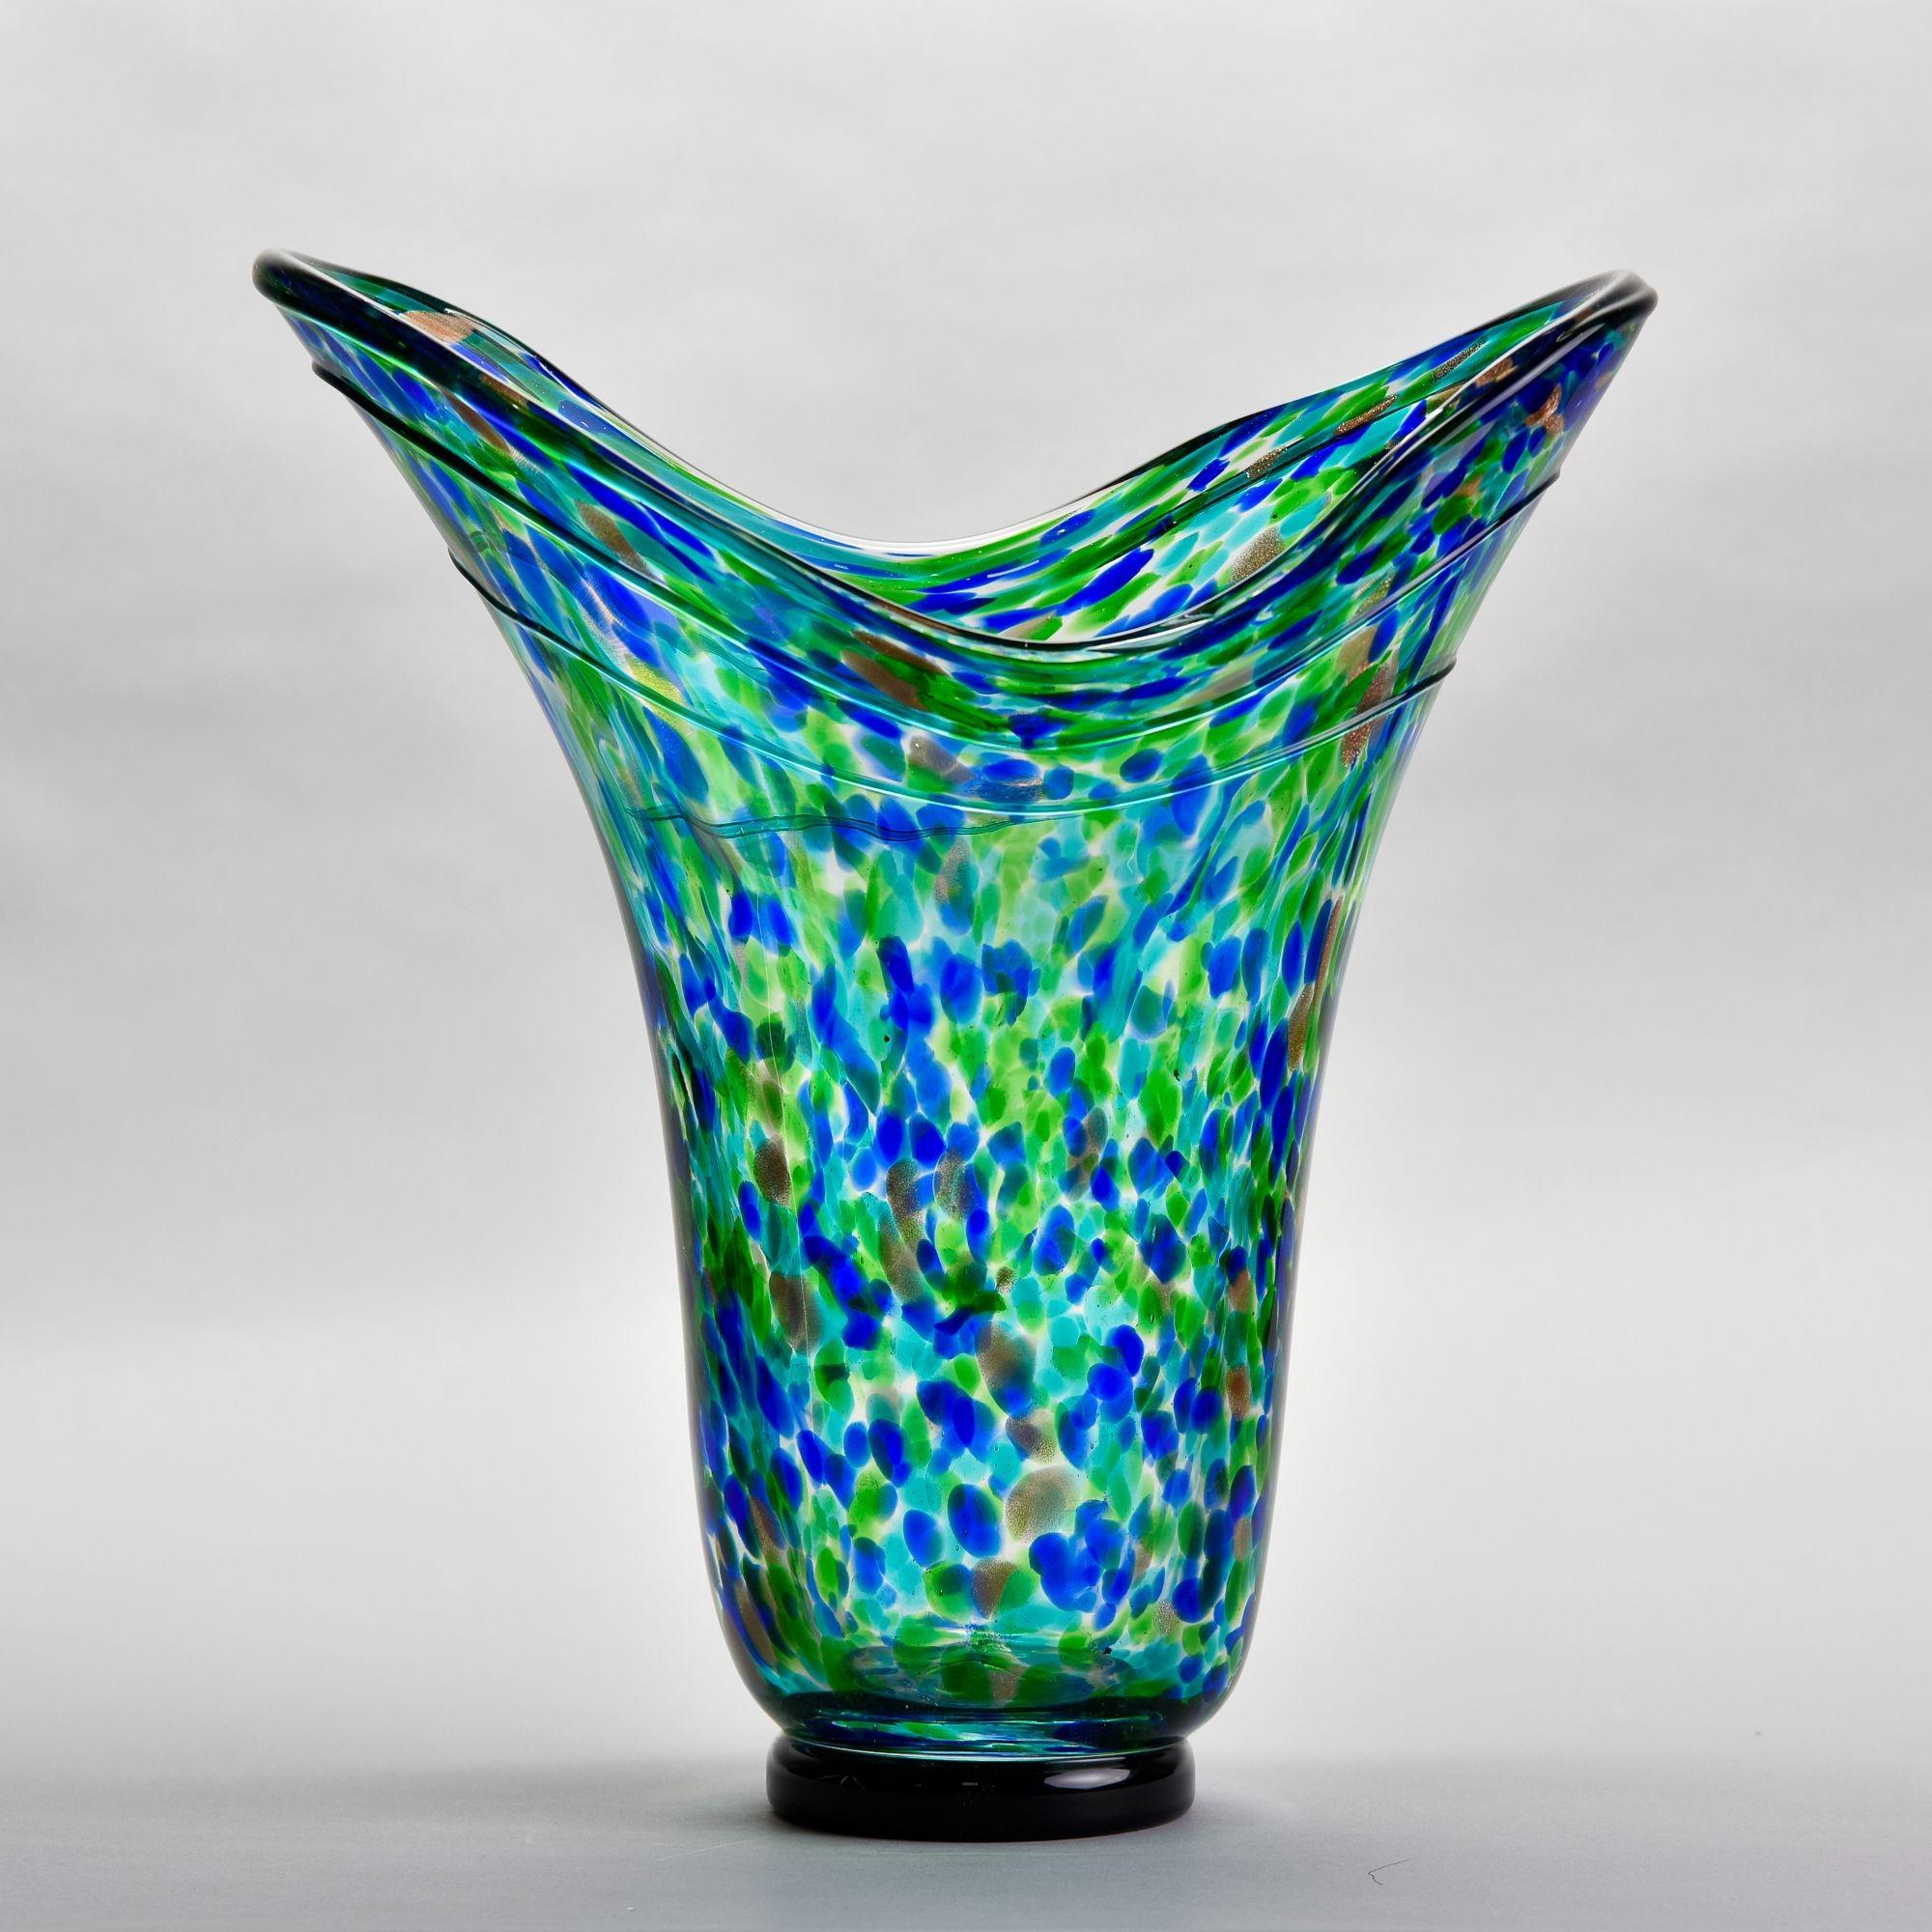 Found in the US, this circa 1990 tall art glass vase has a wide, flared neck and blue green splatter pattern with accents of metallic gold. No flaws found. Polished pontil. Unknown maker.